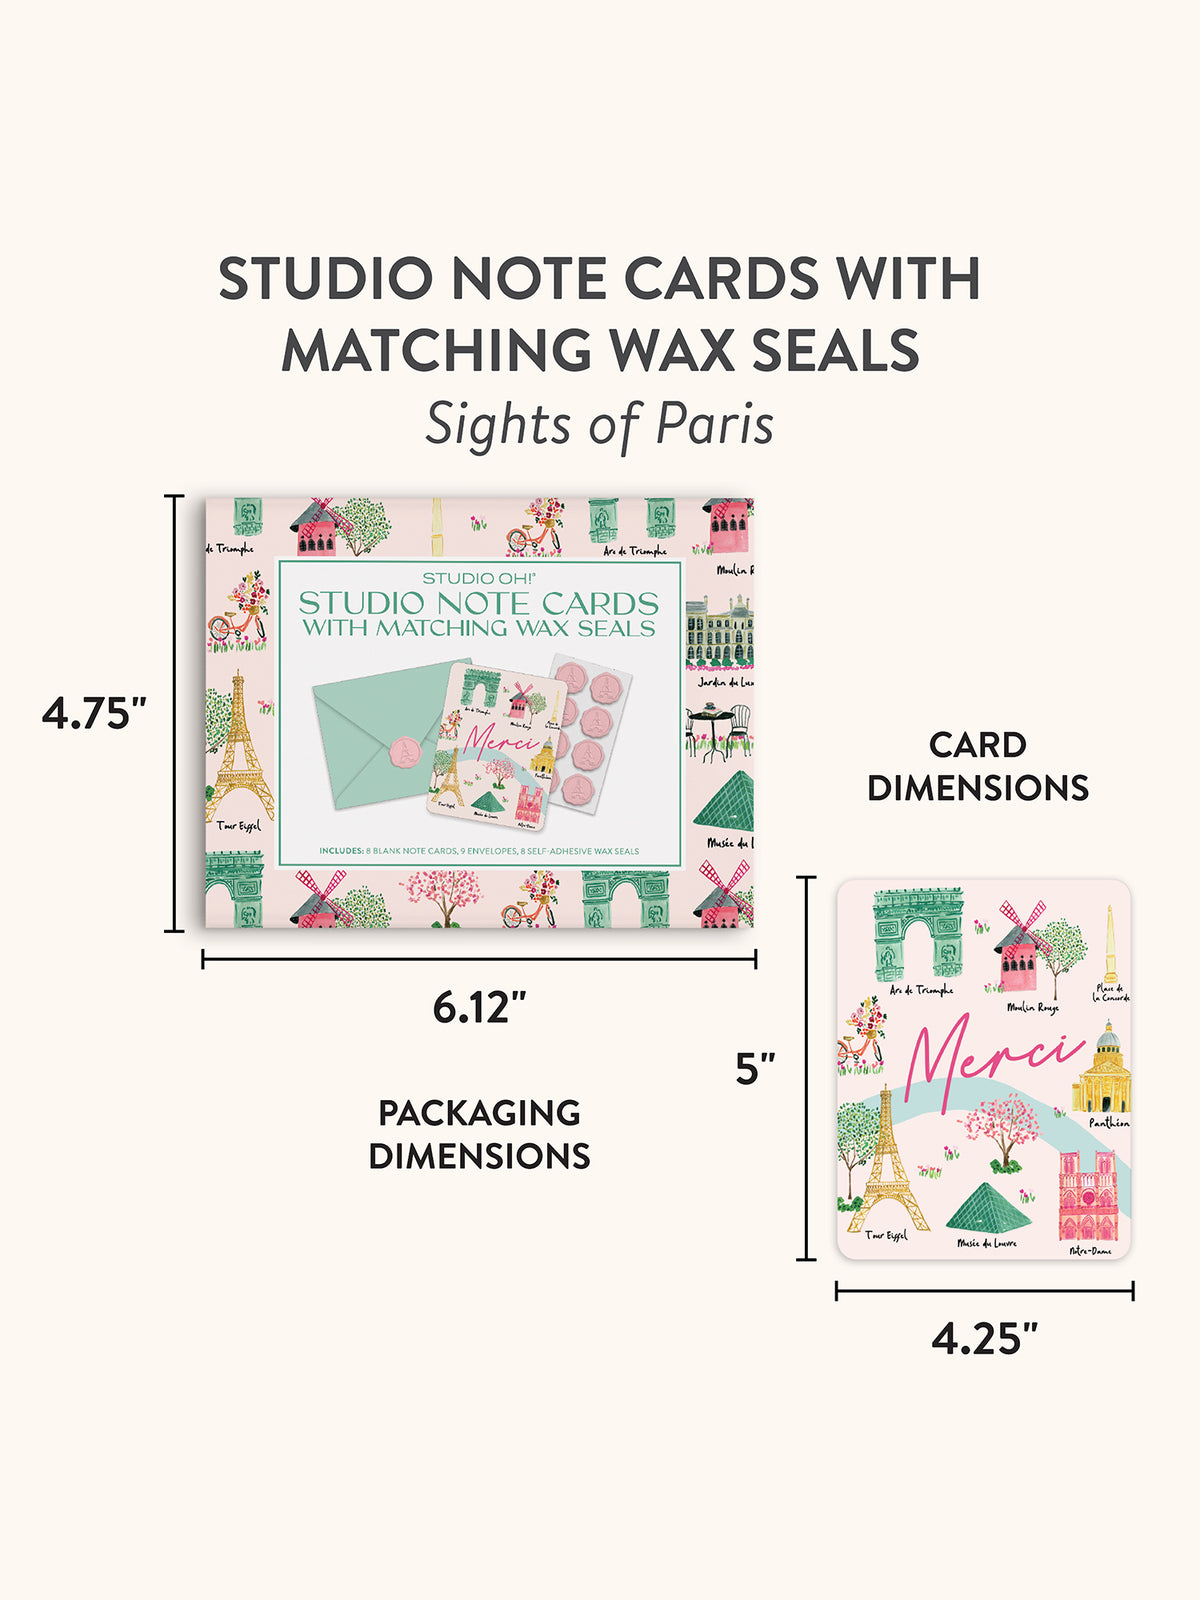 Sights of Paris Note Card Set with Wax Seals